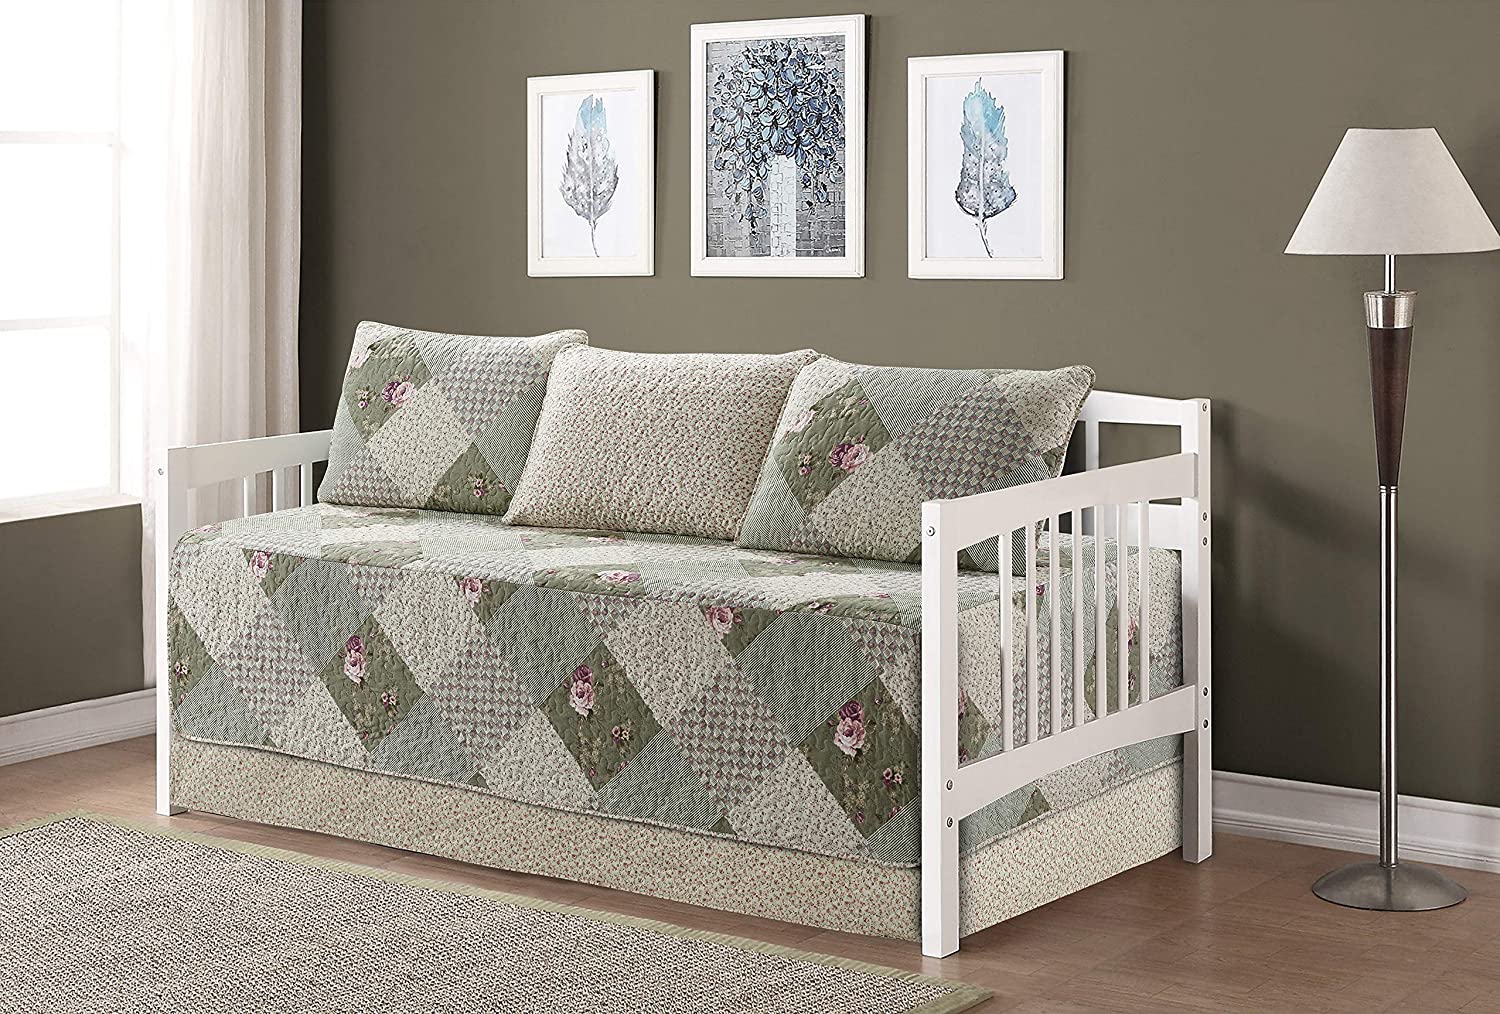 Details about   Mk Collection 5pc Day Bed Quilted Bedspread Set Floral Light Blue White Gray Nav 